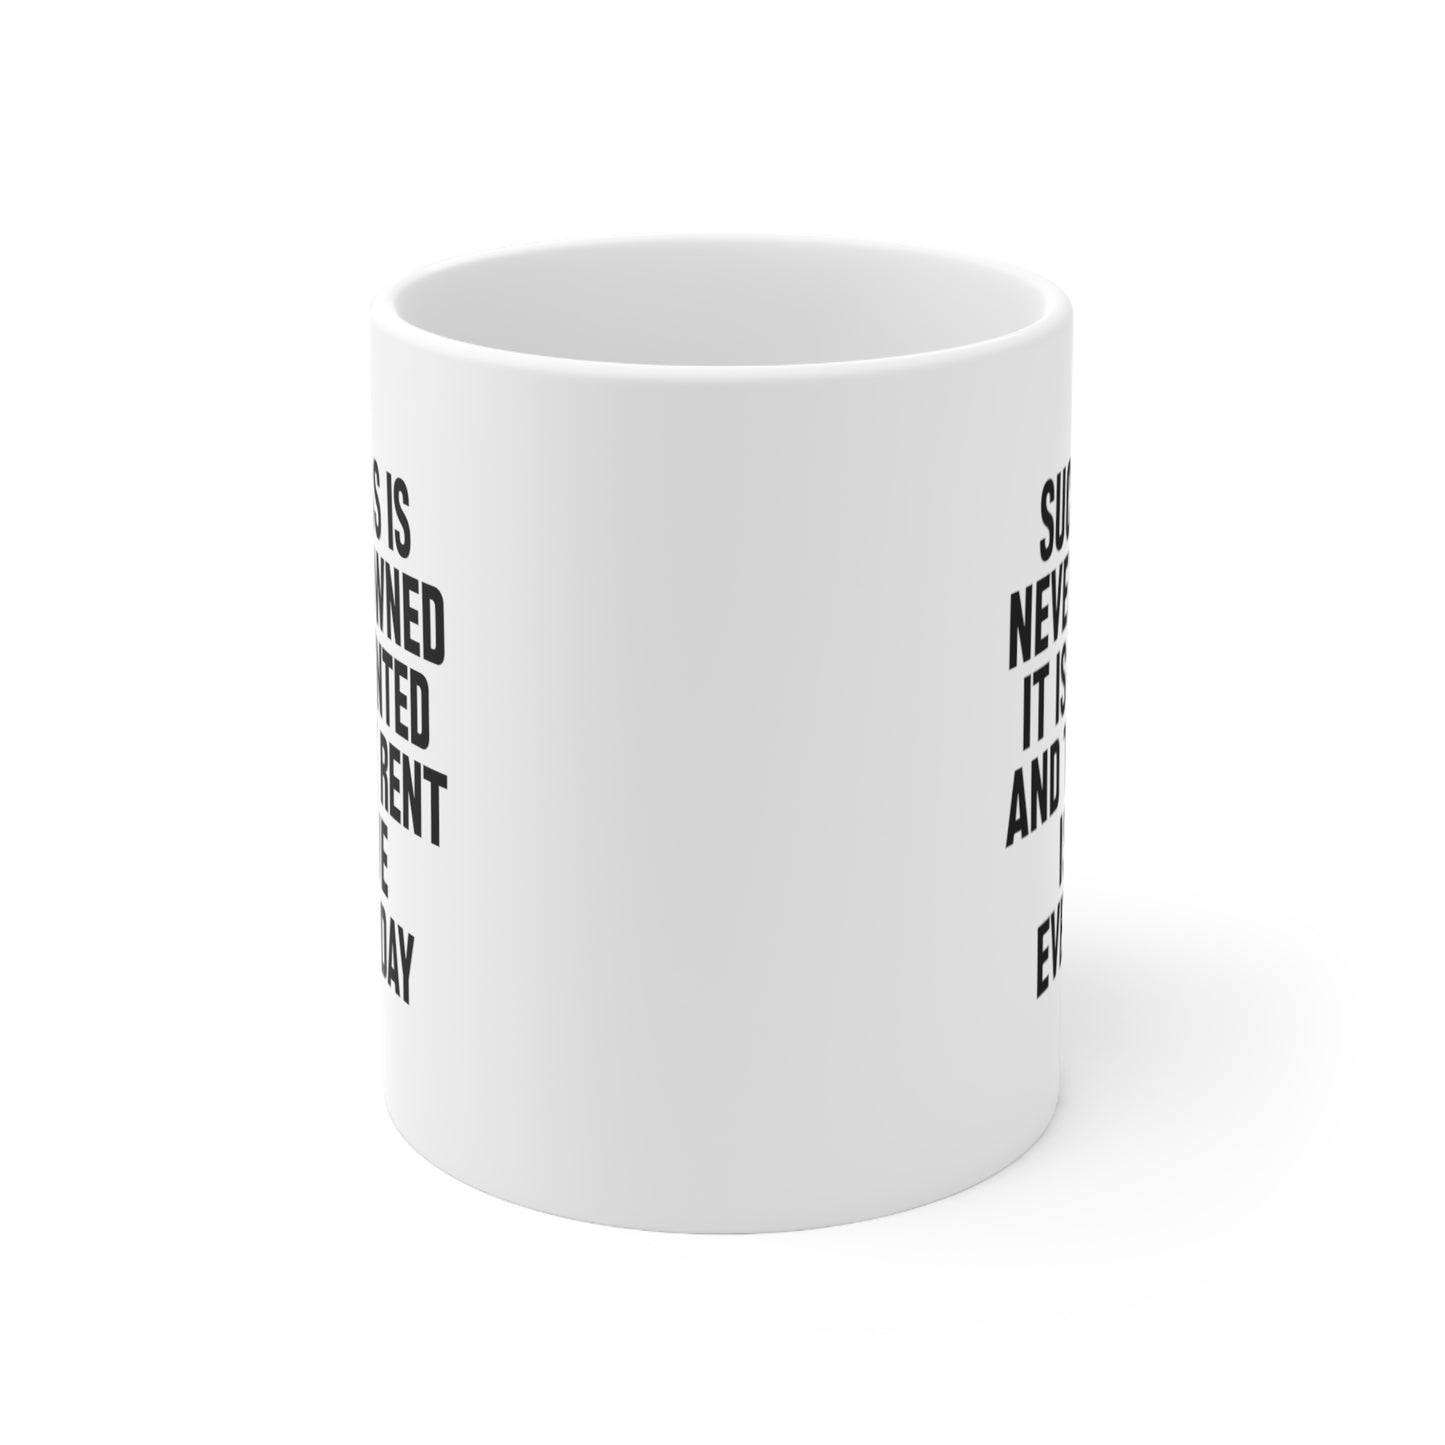 Success is never owned it is rented and the rent is due every day Coffee Mug 11oz